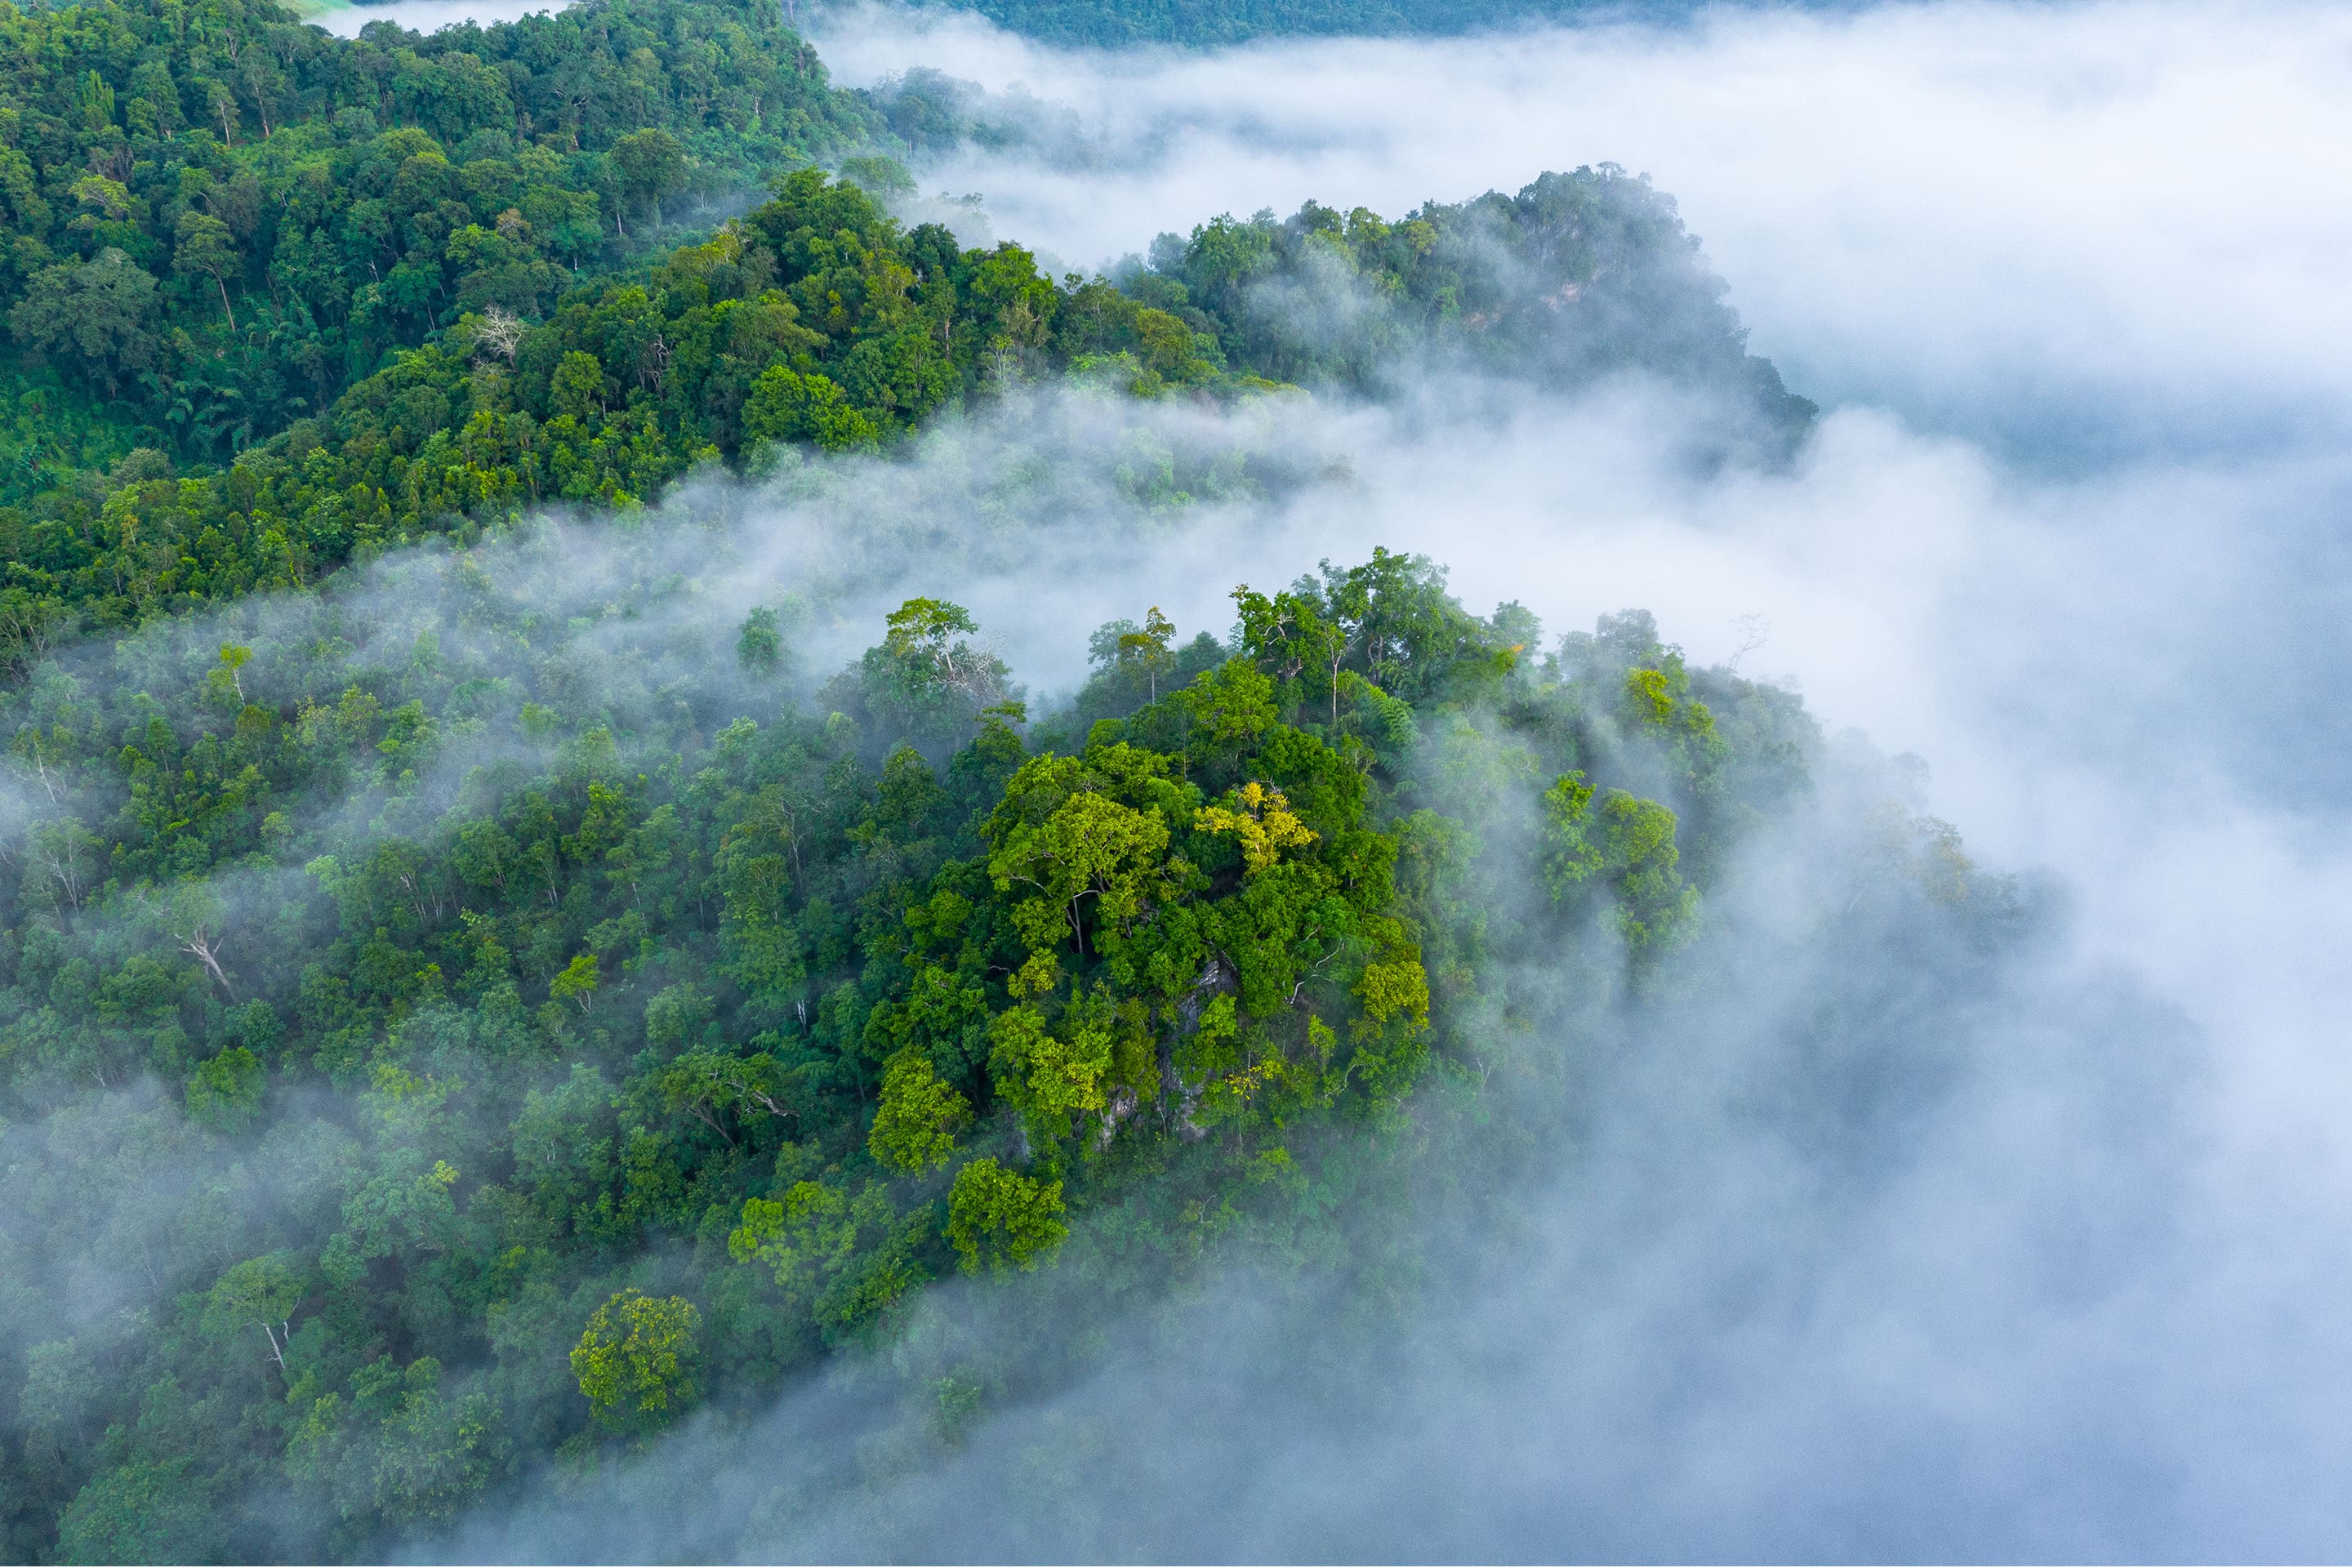 Aerial view of a lush green forest enveloped in white mist.